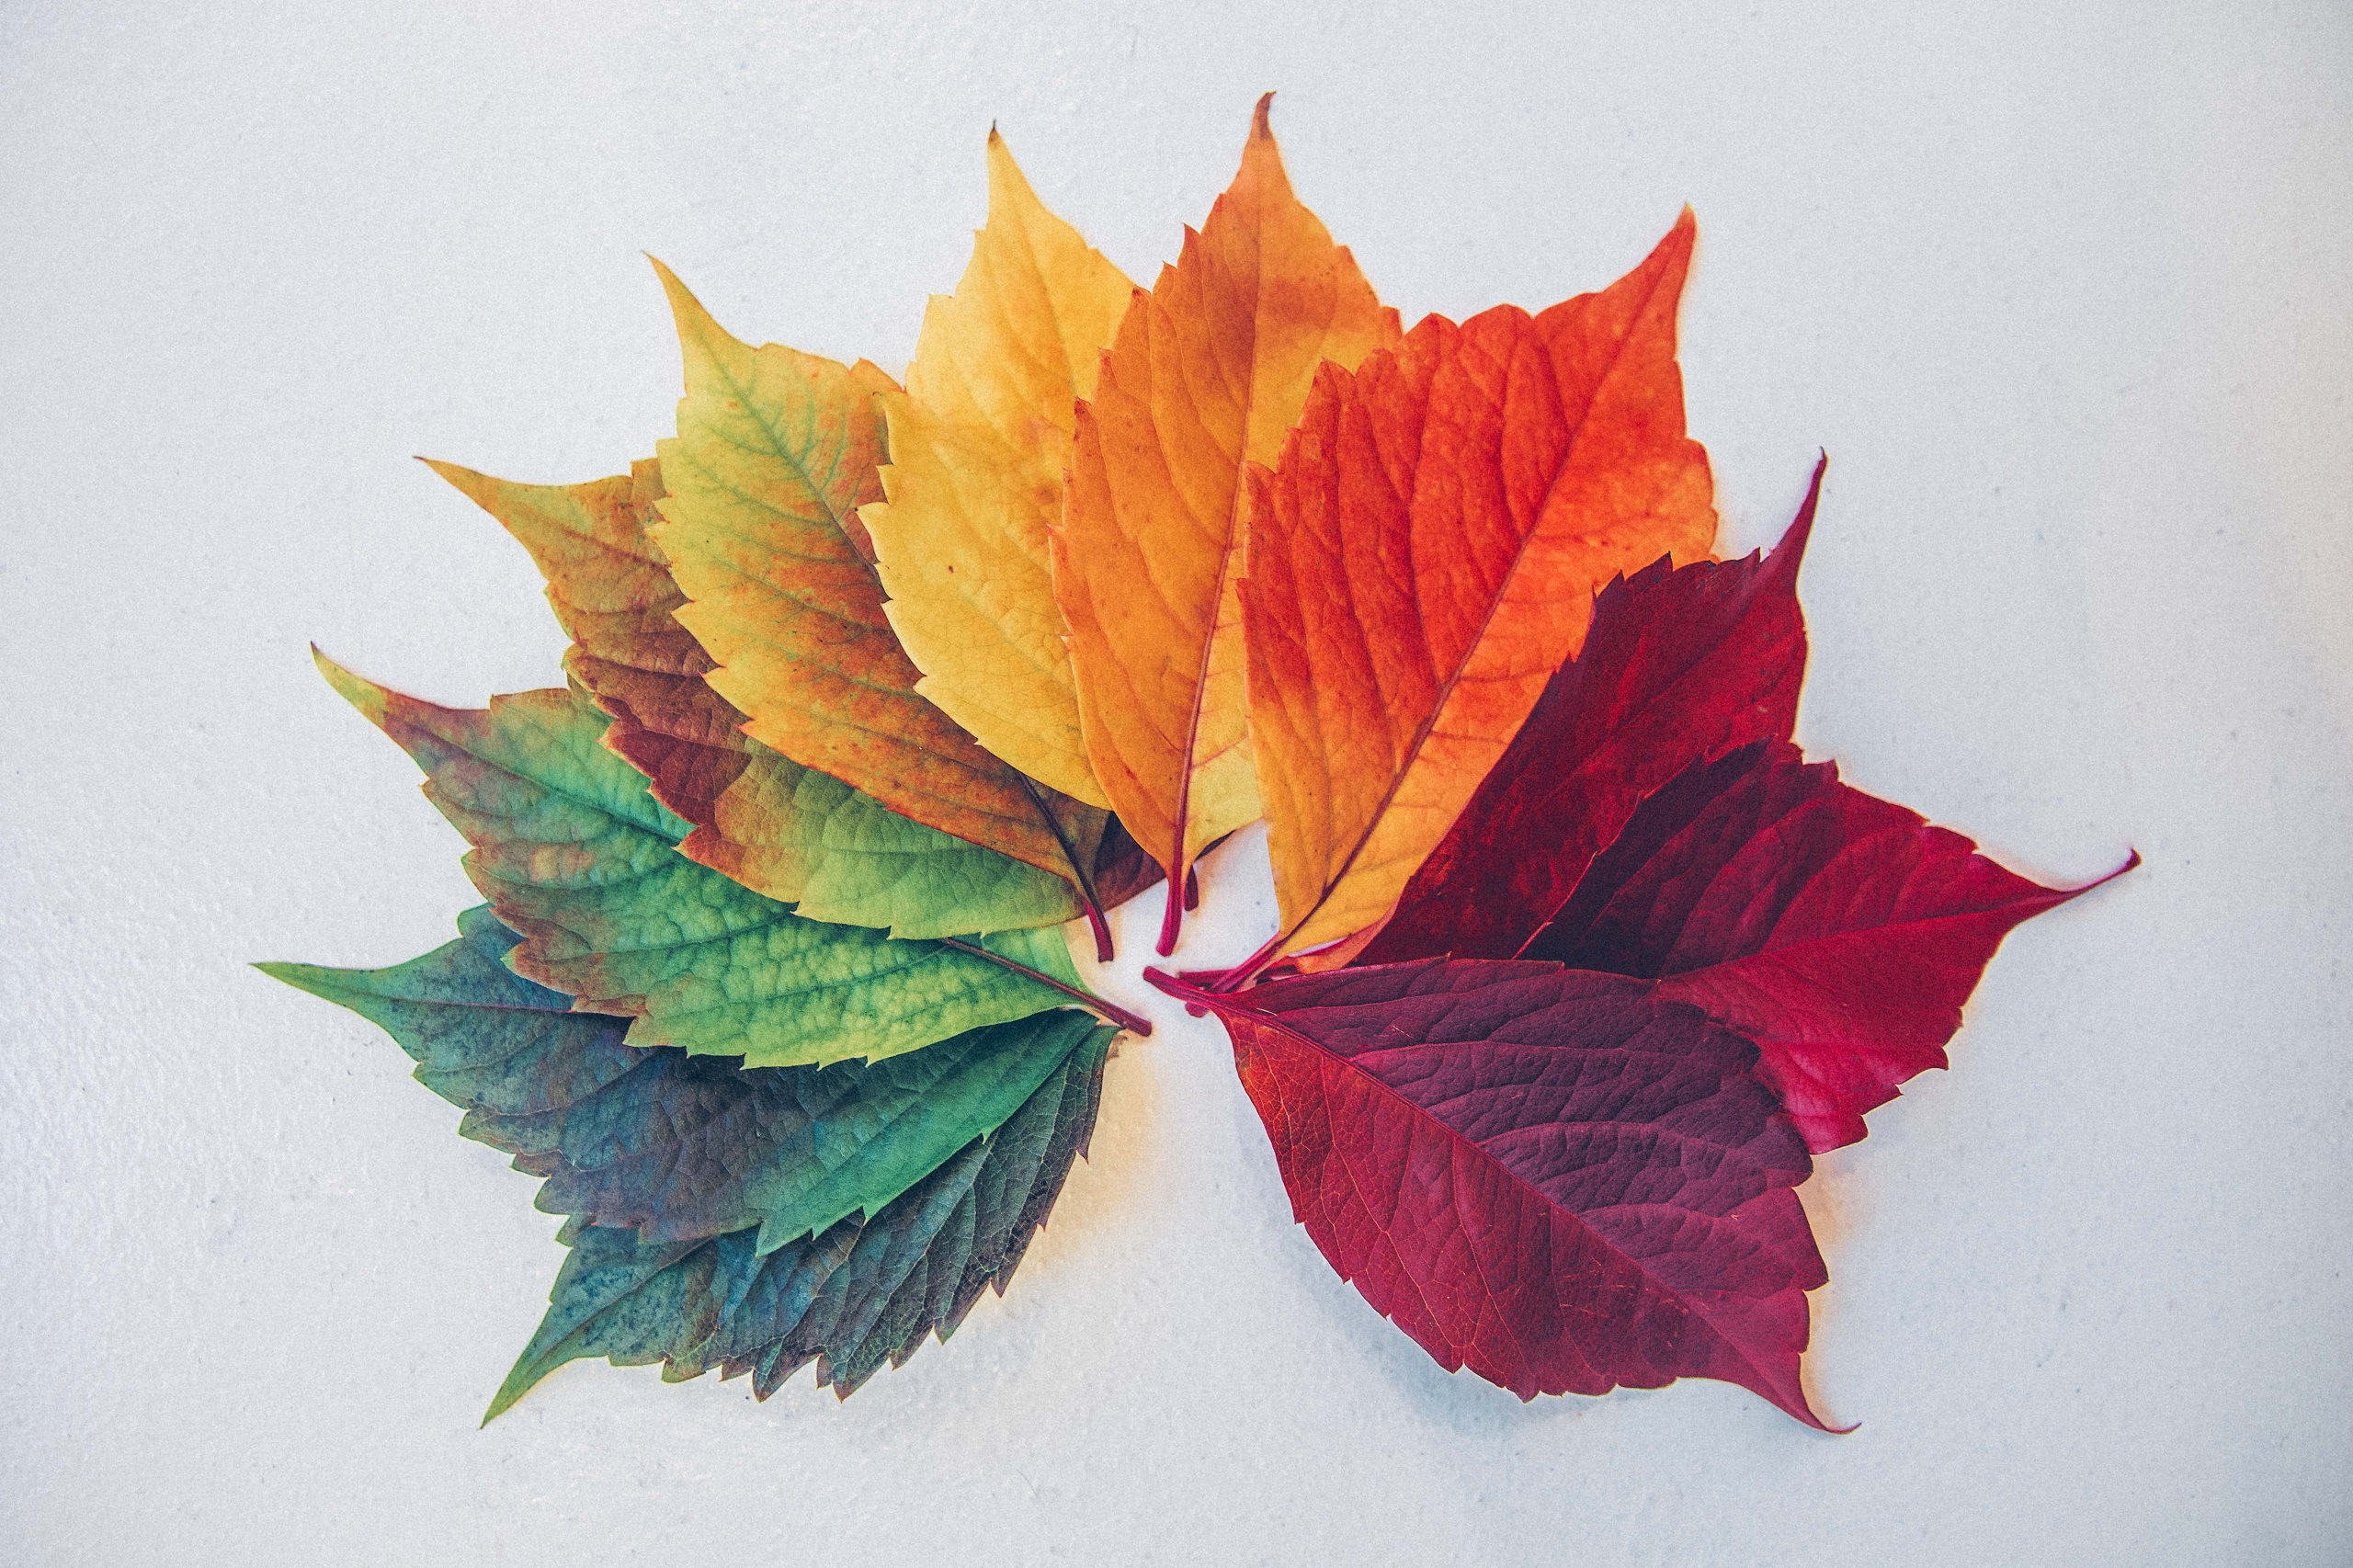 Green, yellow and red leaves are arranged together in a semicircle on a blank white background